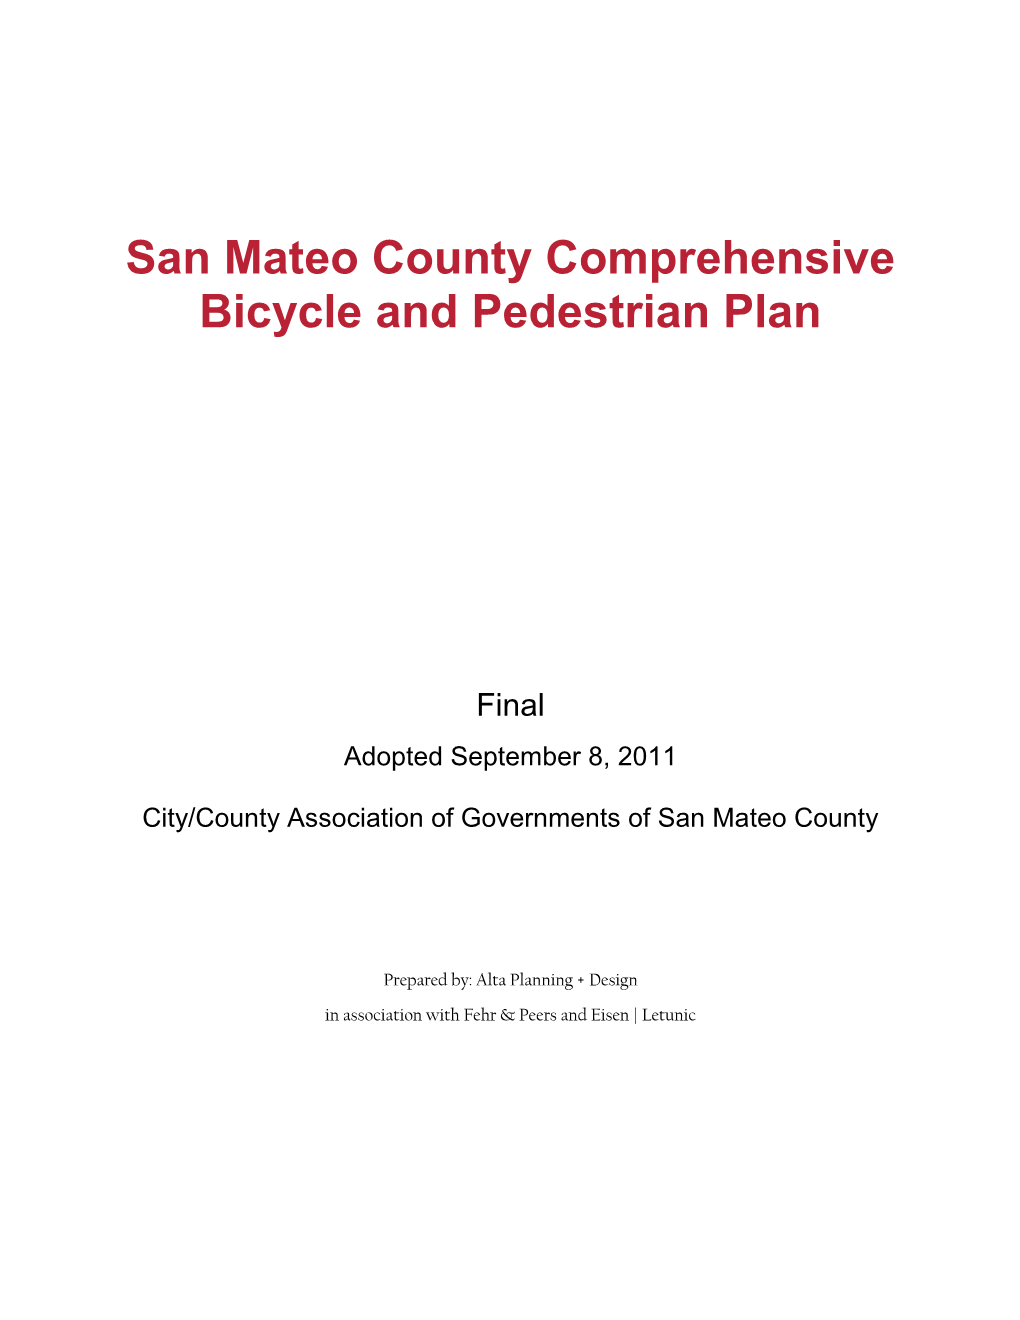 San Mateo County Comprehensive Bicycle and Pedestrian Plan